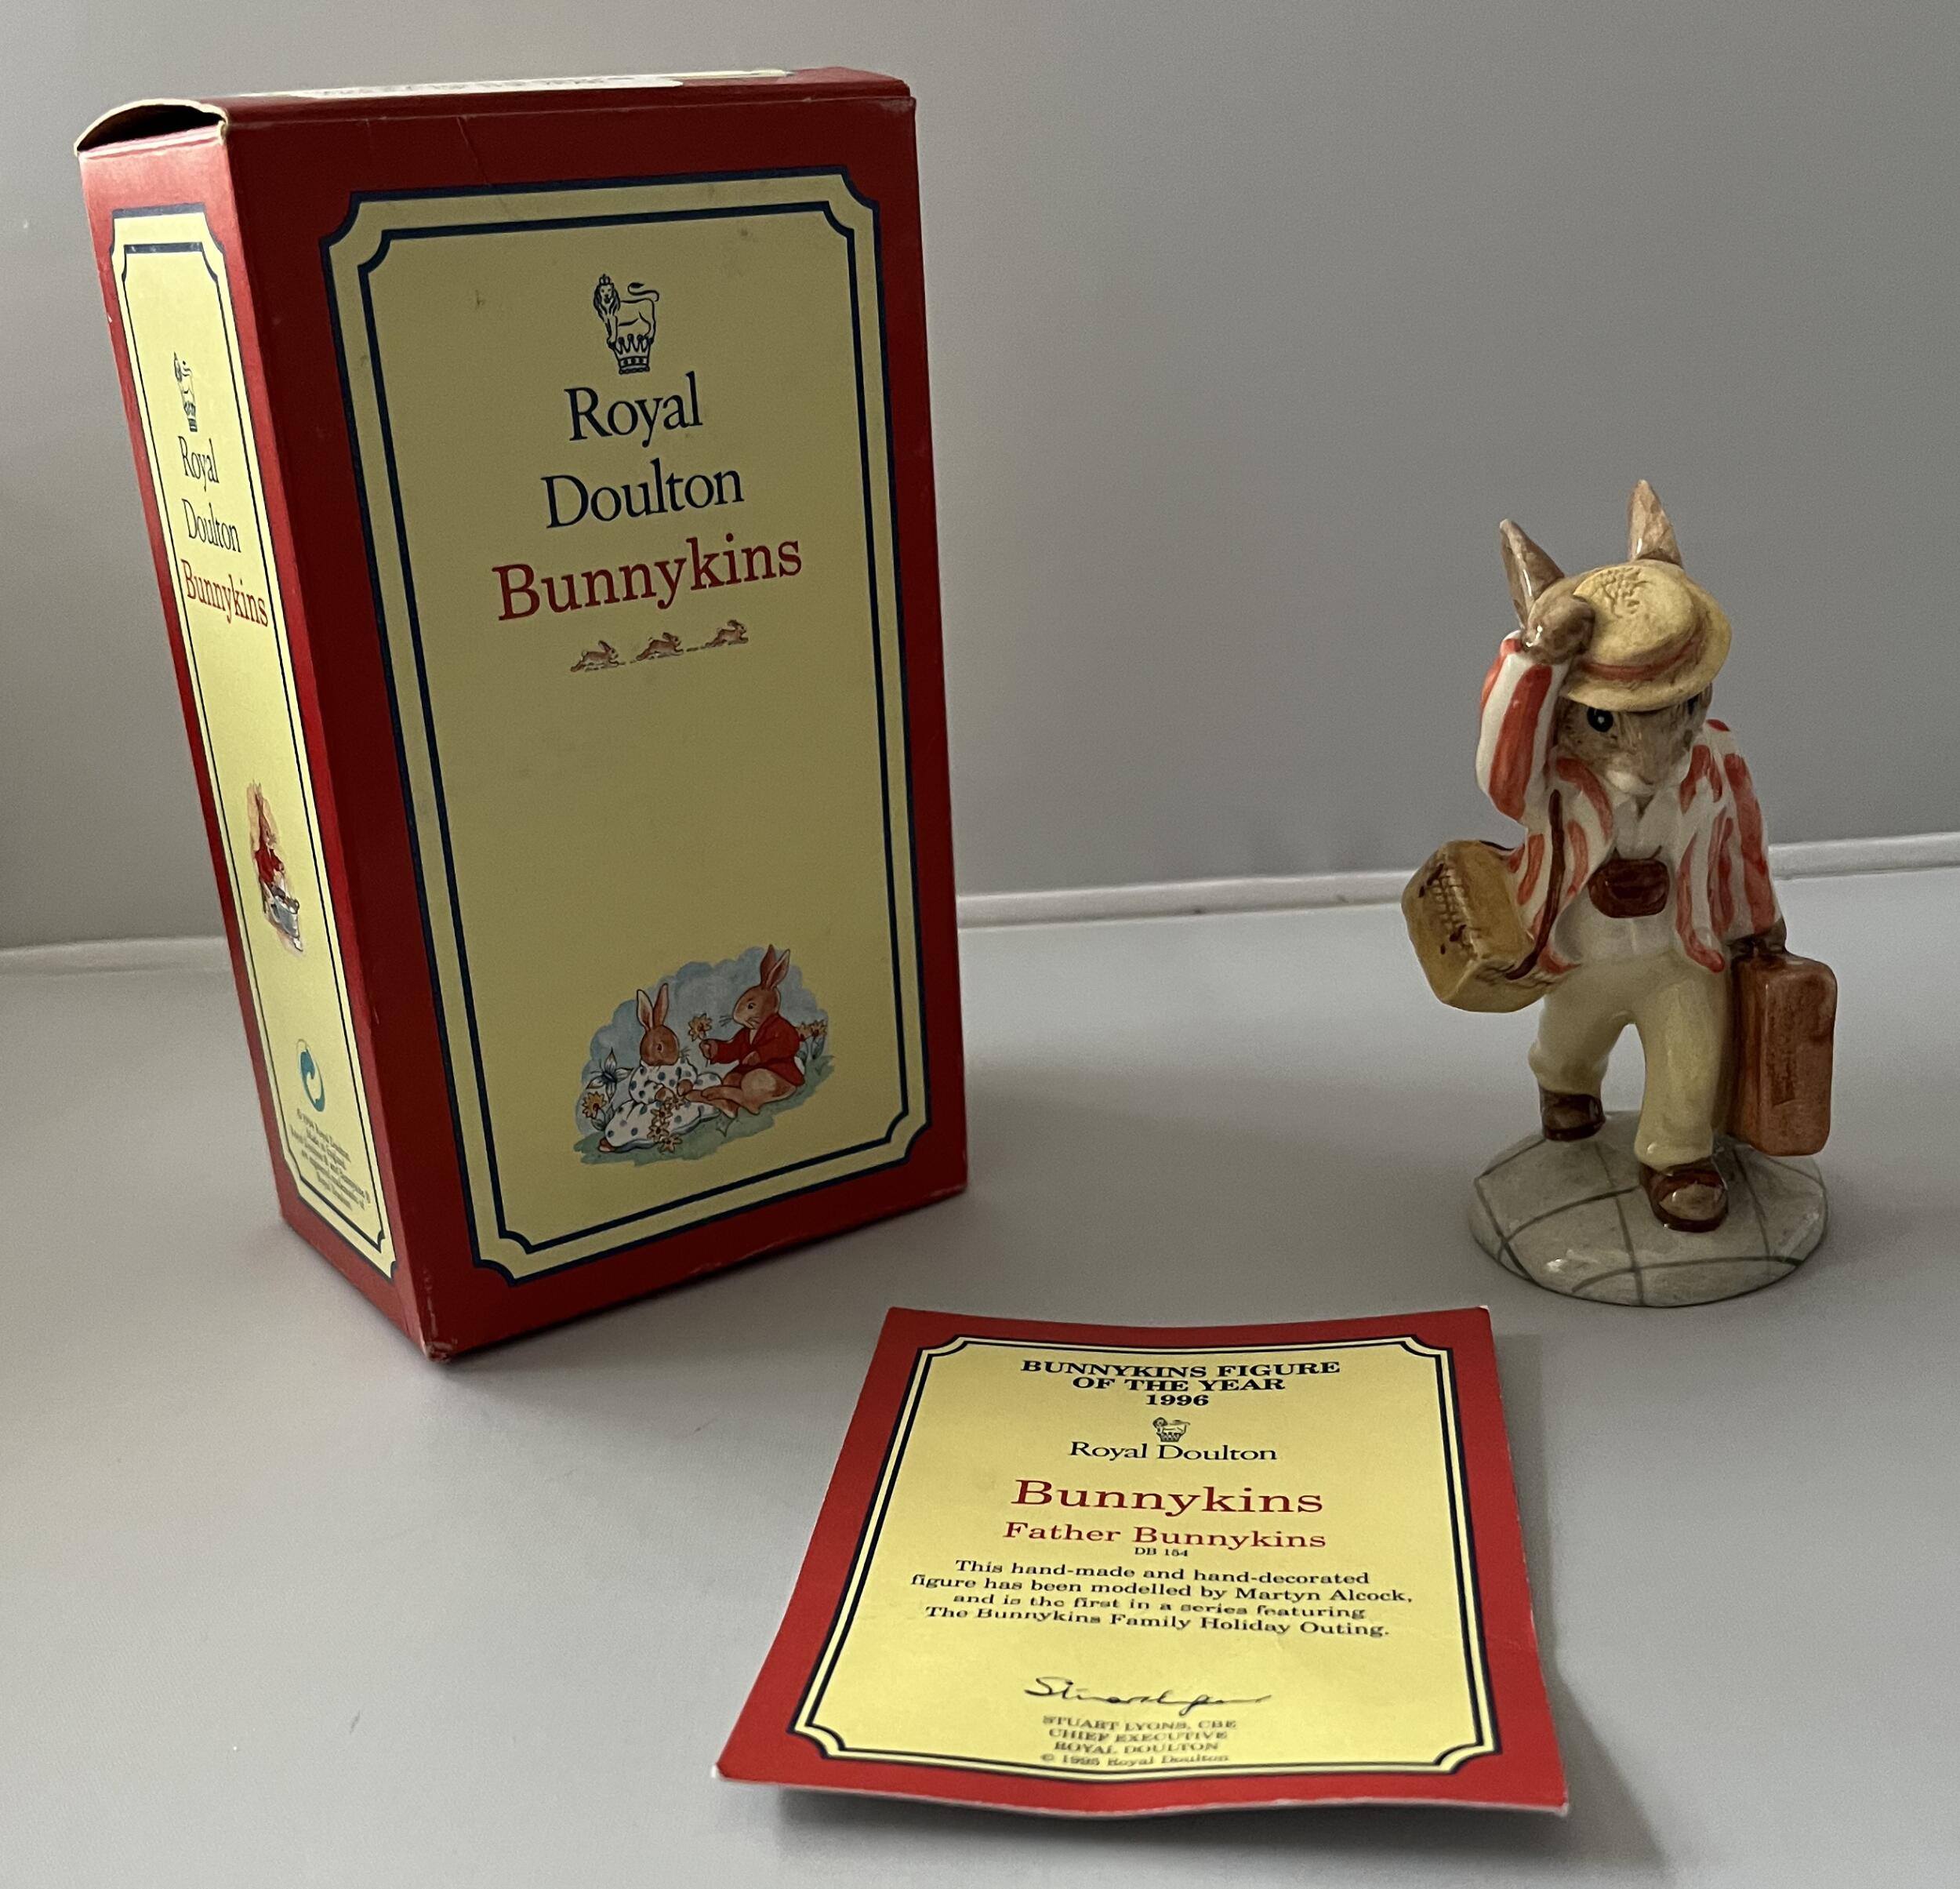 Royal Doulton, Father Bunnykins figurine of the Year 1996, DB154, in the Original box with certificate, approx 10 cm tall